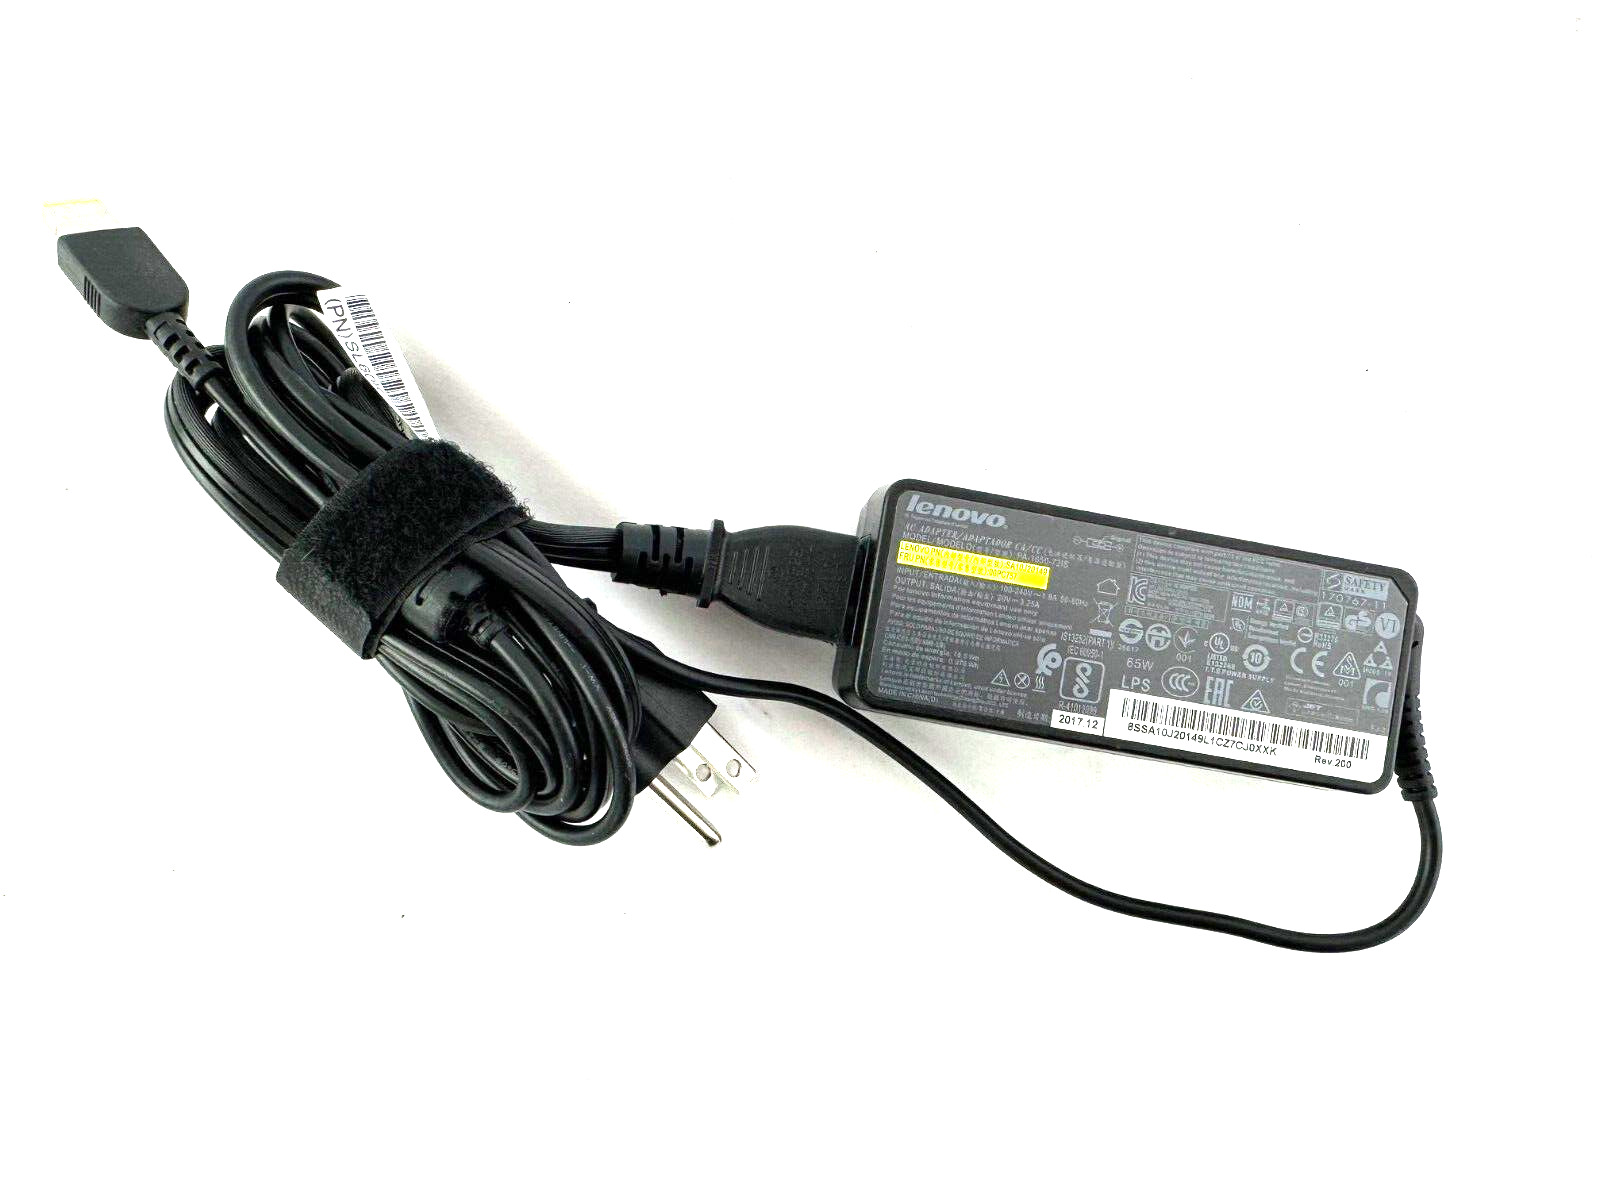 LOT OF 25 LENOVO 65w AC ADAPTER PA-1650-72IS